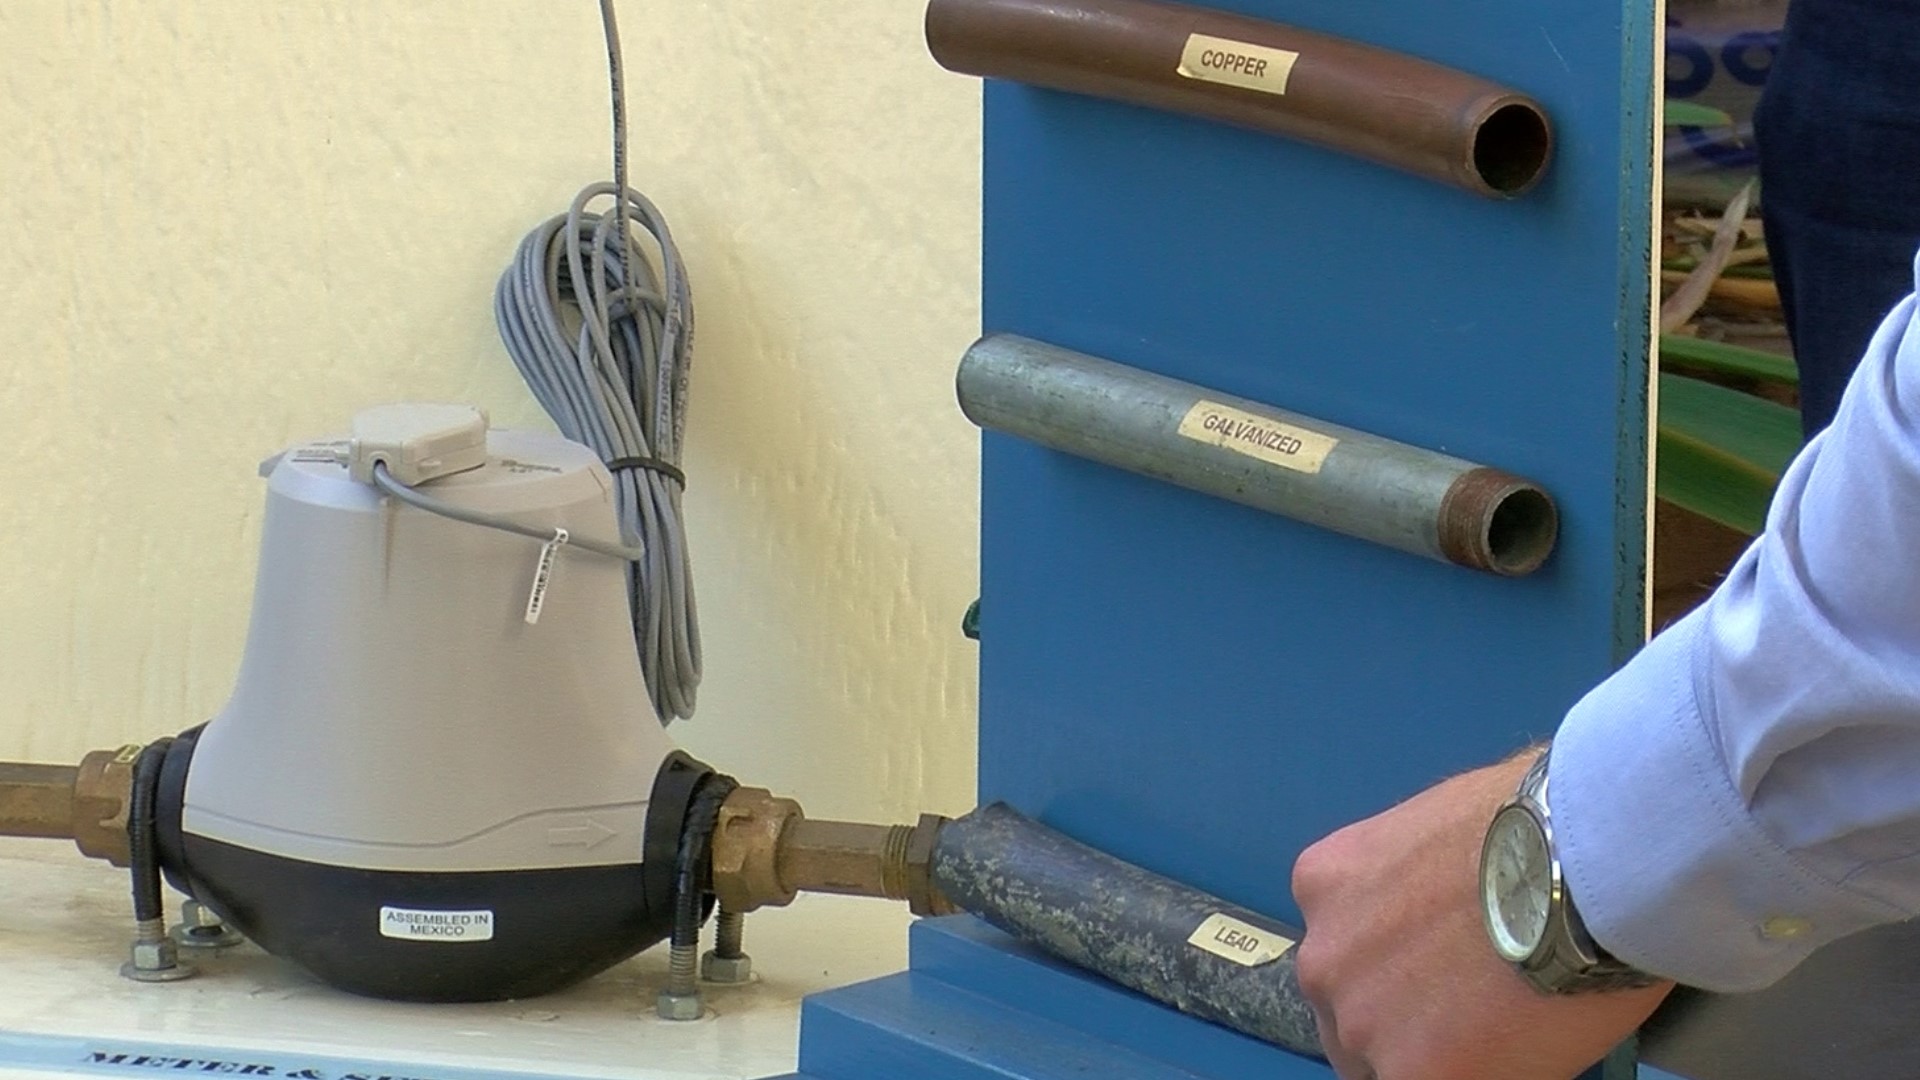 Residents can register for cost-free replacement of lead service lines through the city of Toledo's program. The goal is for all lead lines to be replaced by 2026.